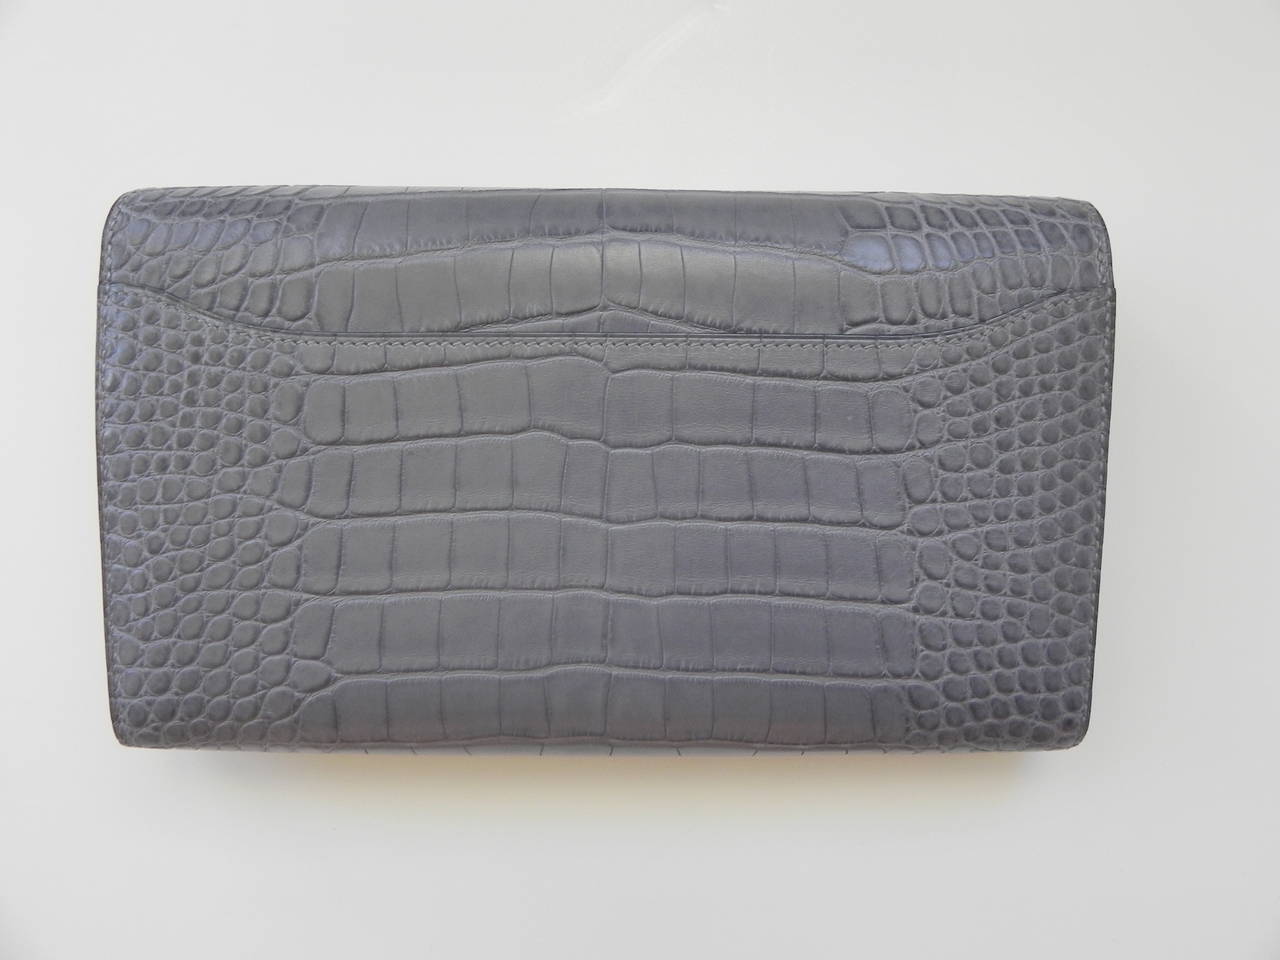 Hermes Alligator Mississippi Gray Constance wallet clutch .

Color :8M GRIS PARIS

Excellent condition with the original Price tag and description .Hermes Box.

Hermes Cites permit :Palladium Hardware 

Circa :2011    O Square year